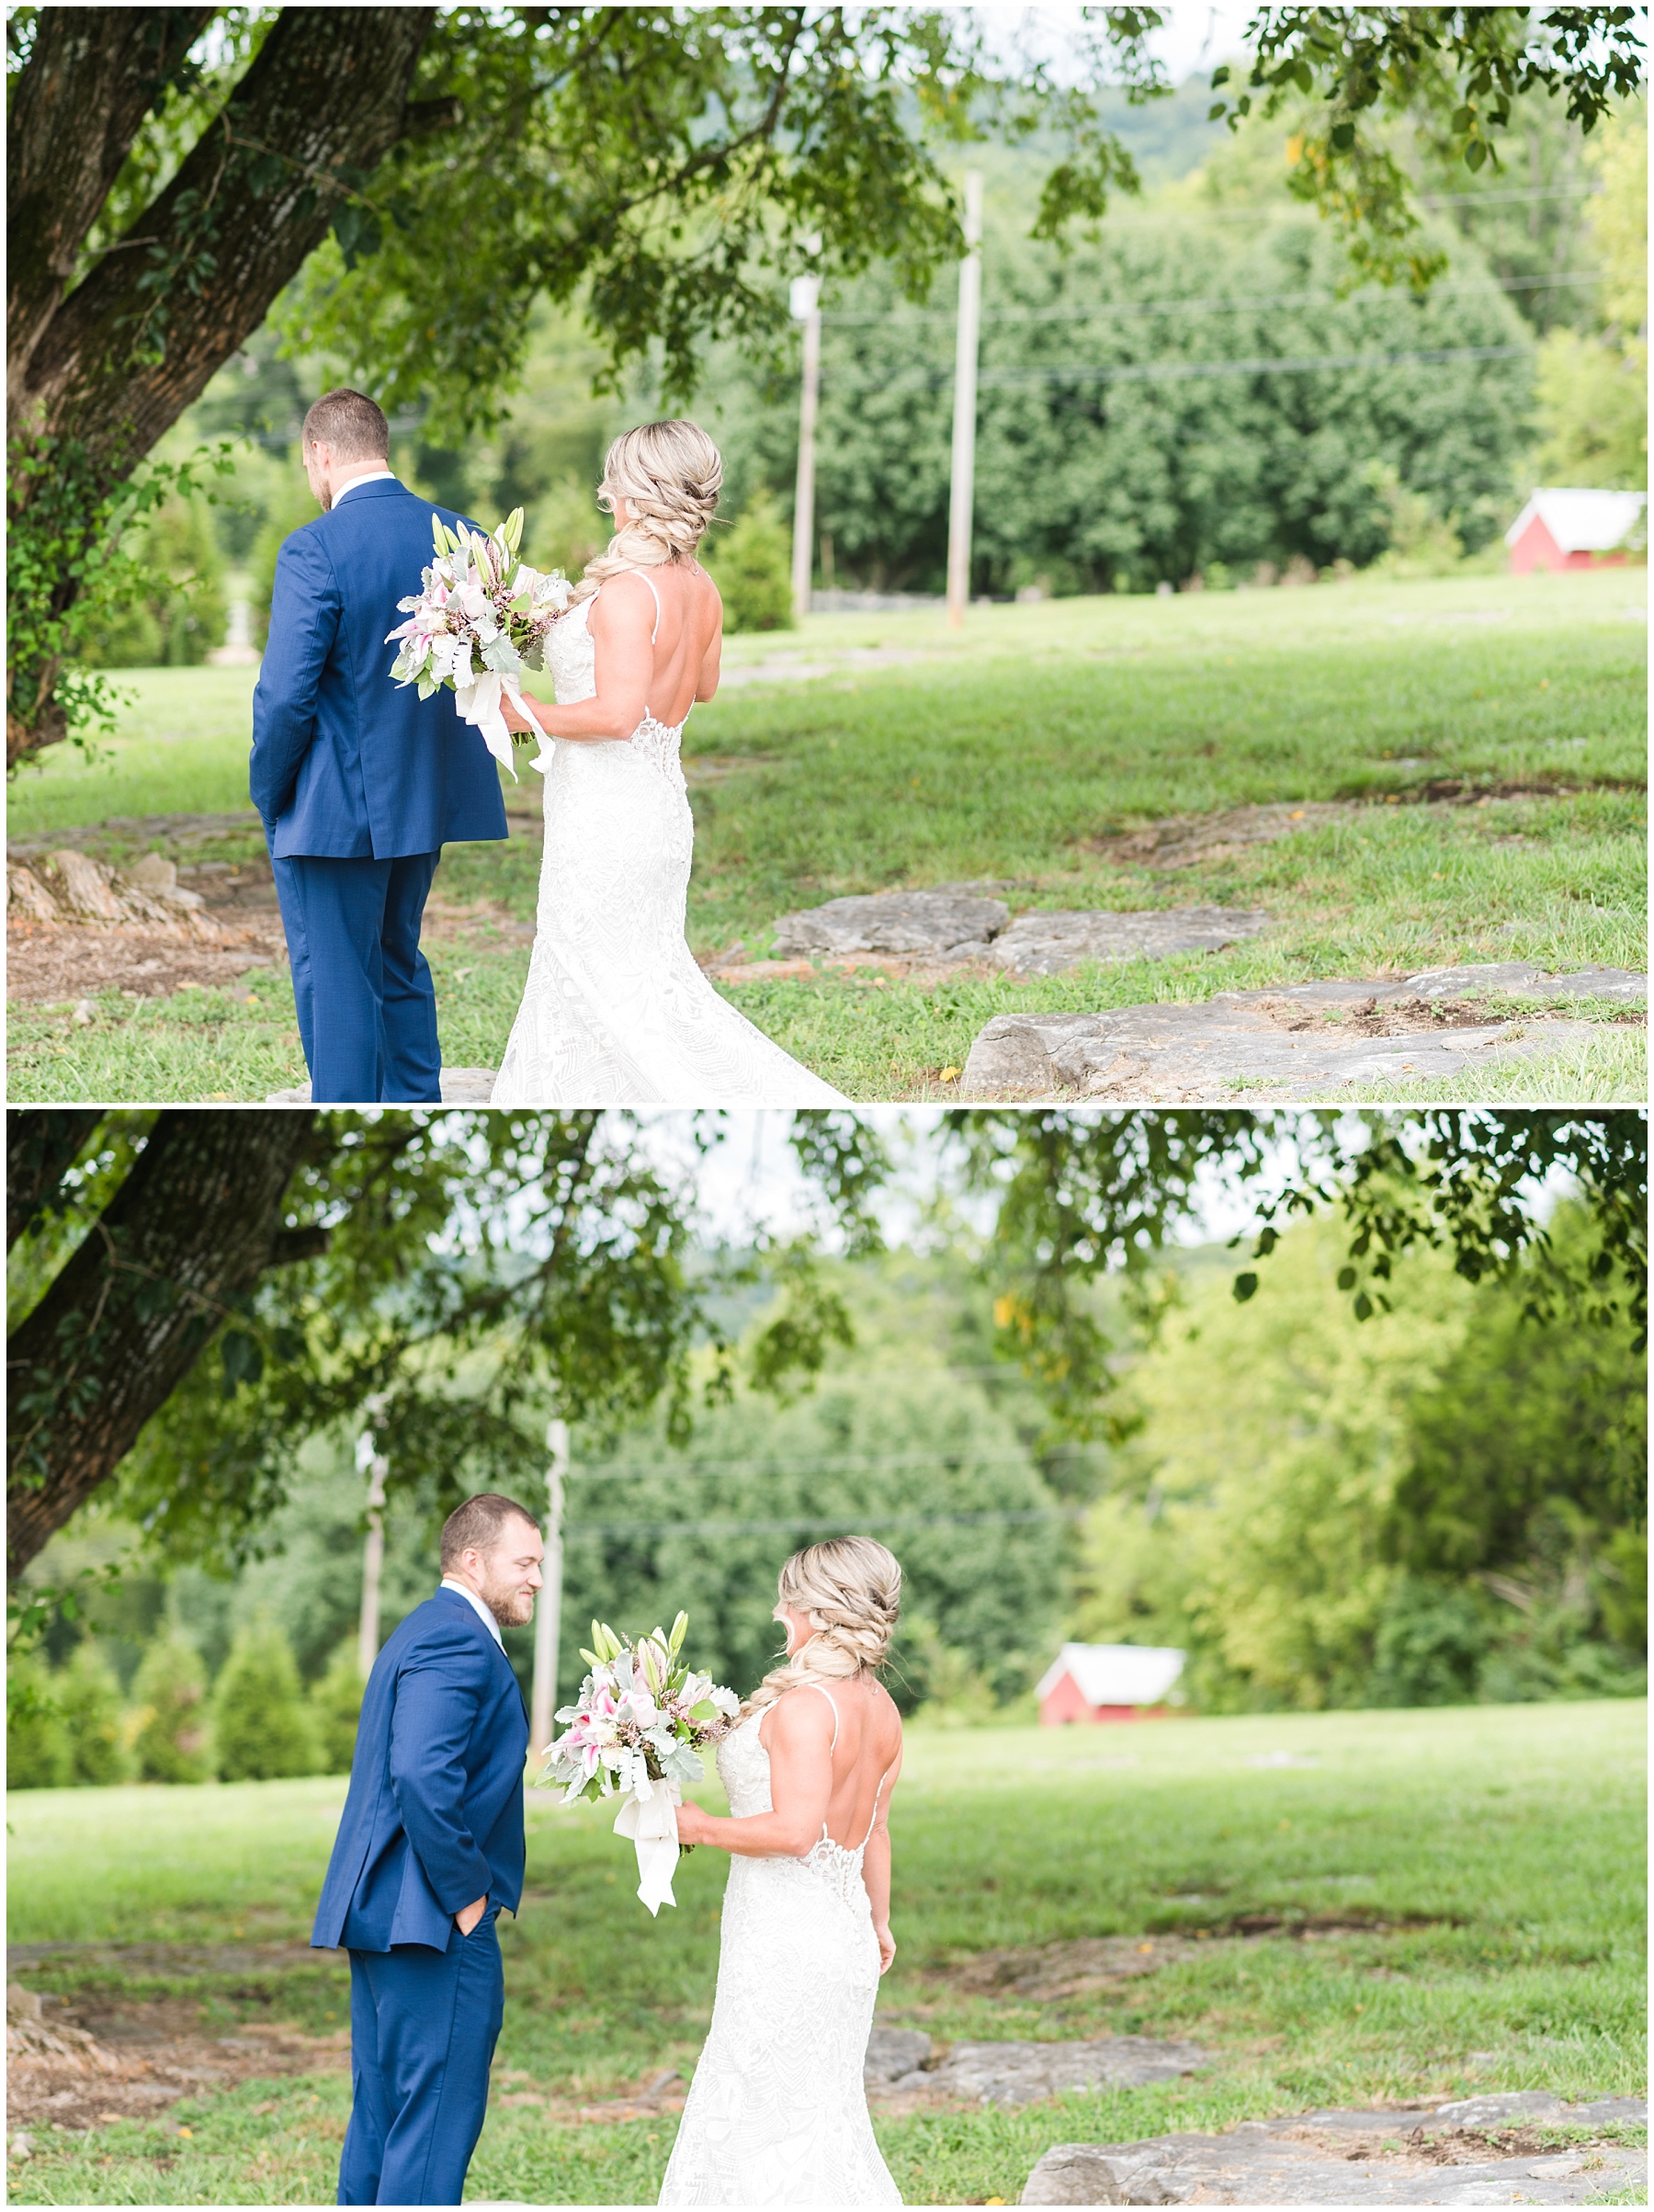 First look at wedding at Allenbrooke Farms